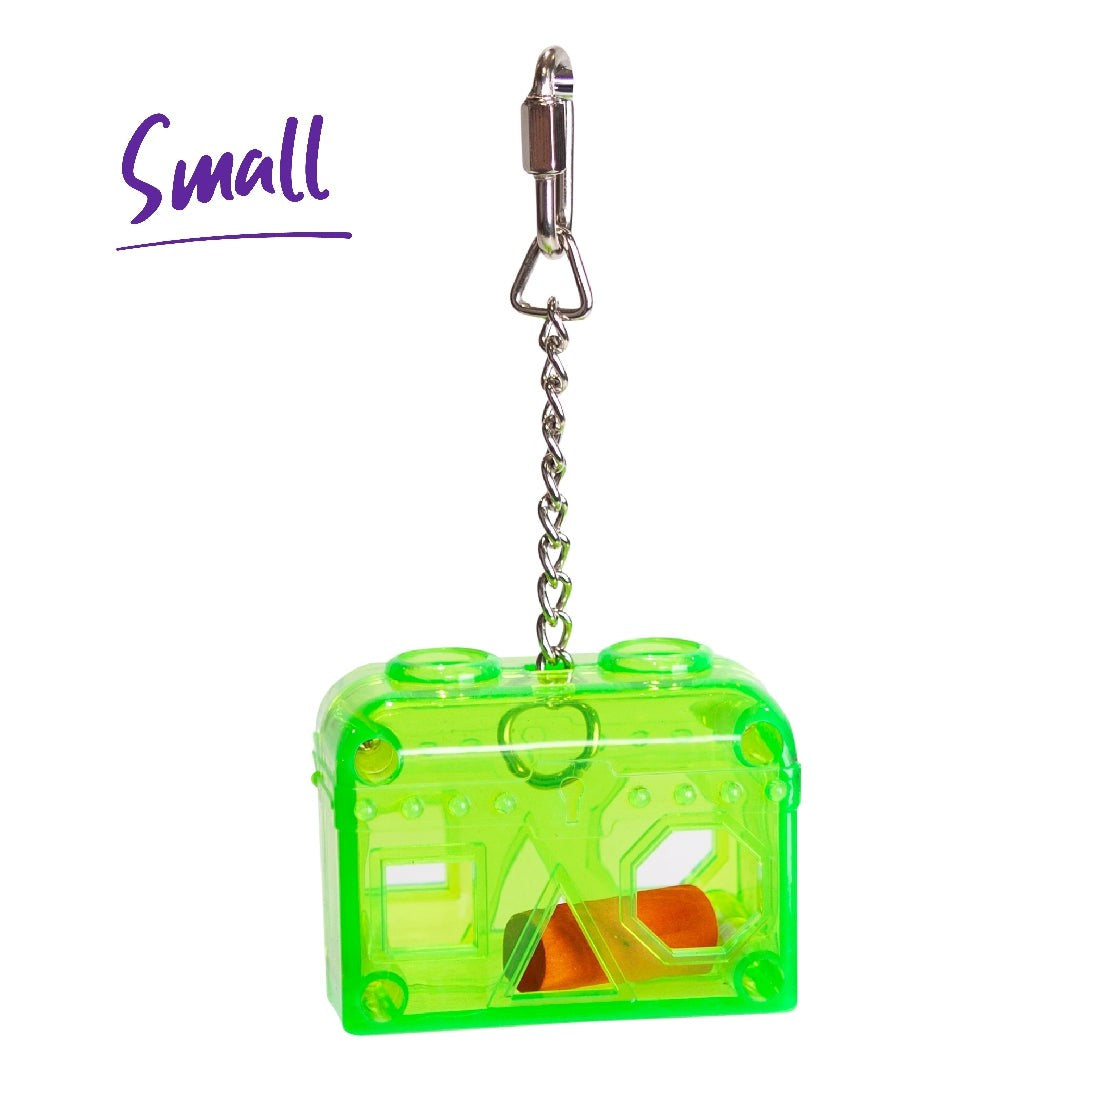 Small green acrylic bird toy with chain and bell inside.